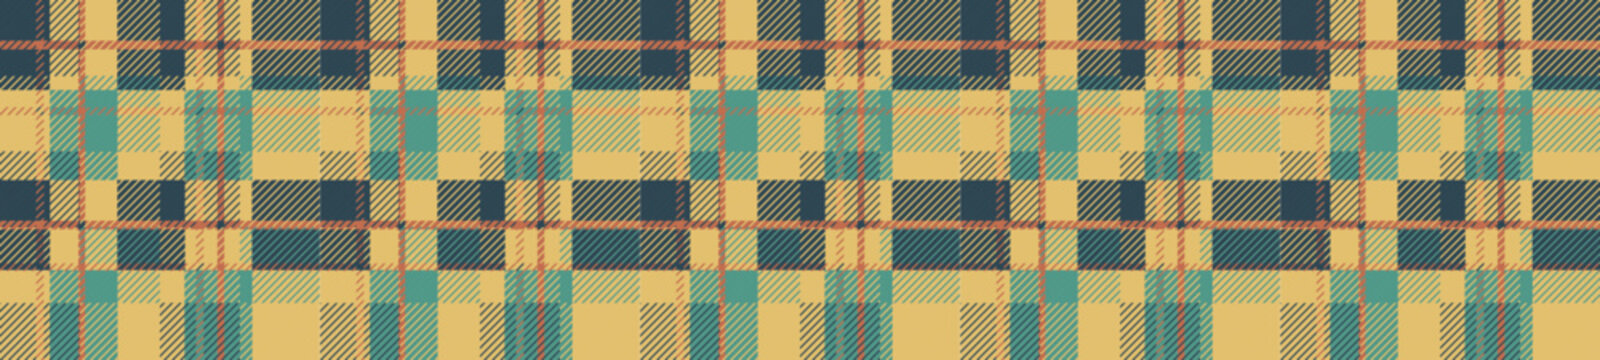 Fabric lumberjack seamless pattern. Checkered yellow blue ornament in classic tiled scottish style symbols stylish coloring of rustic shirt traditional geometric style vector square.